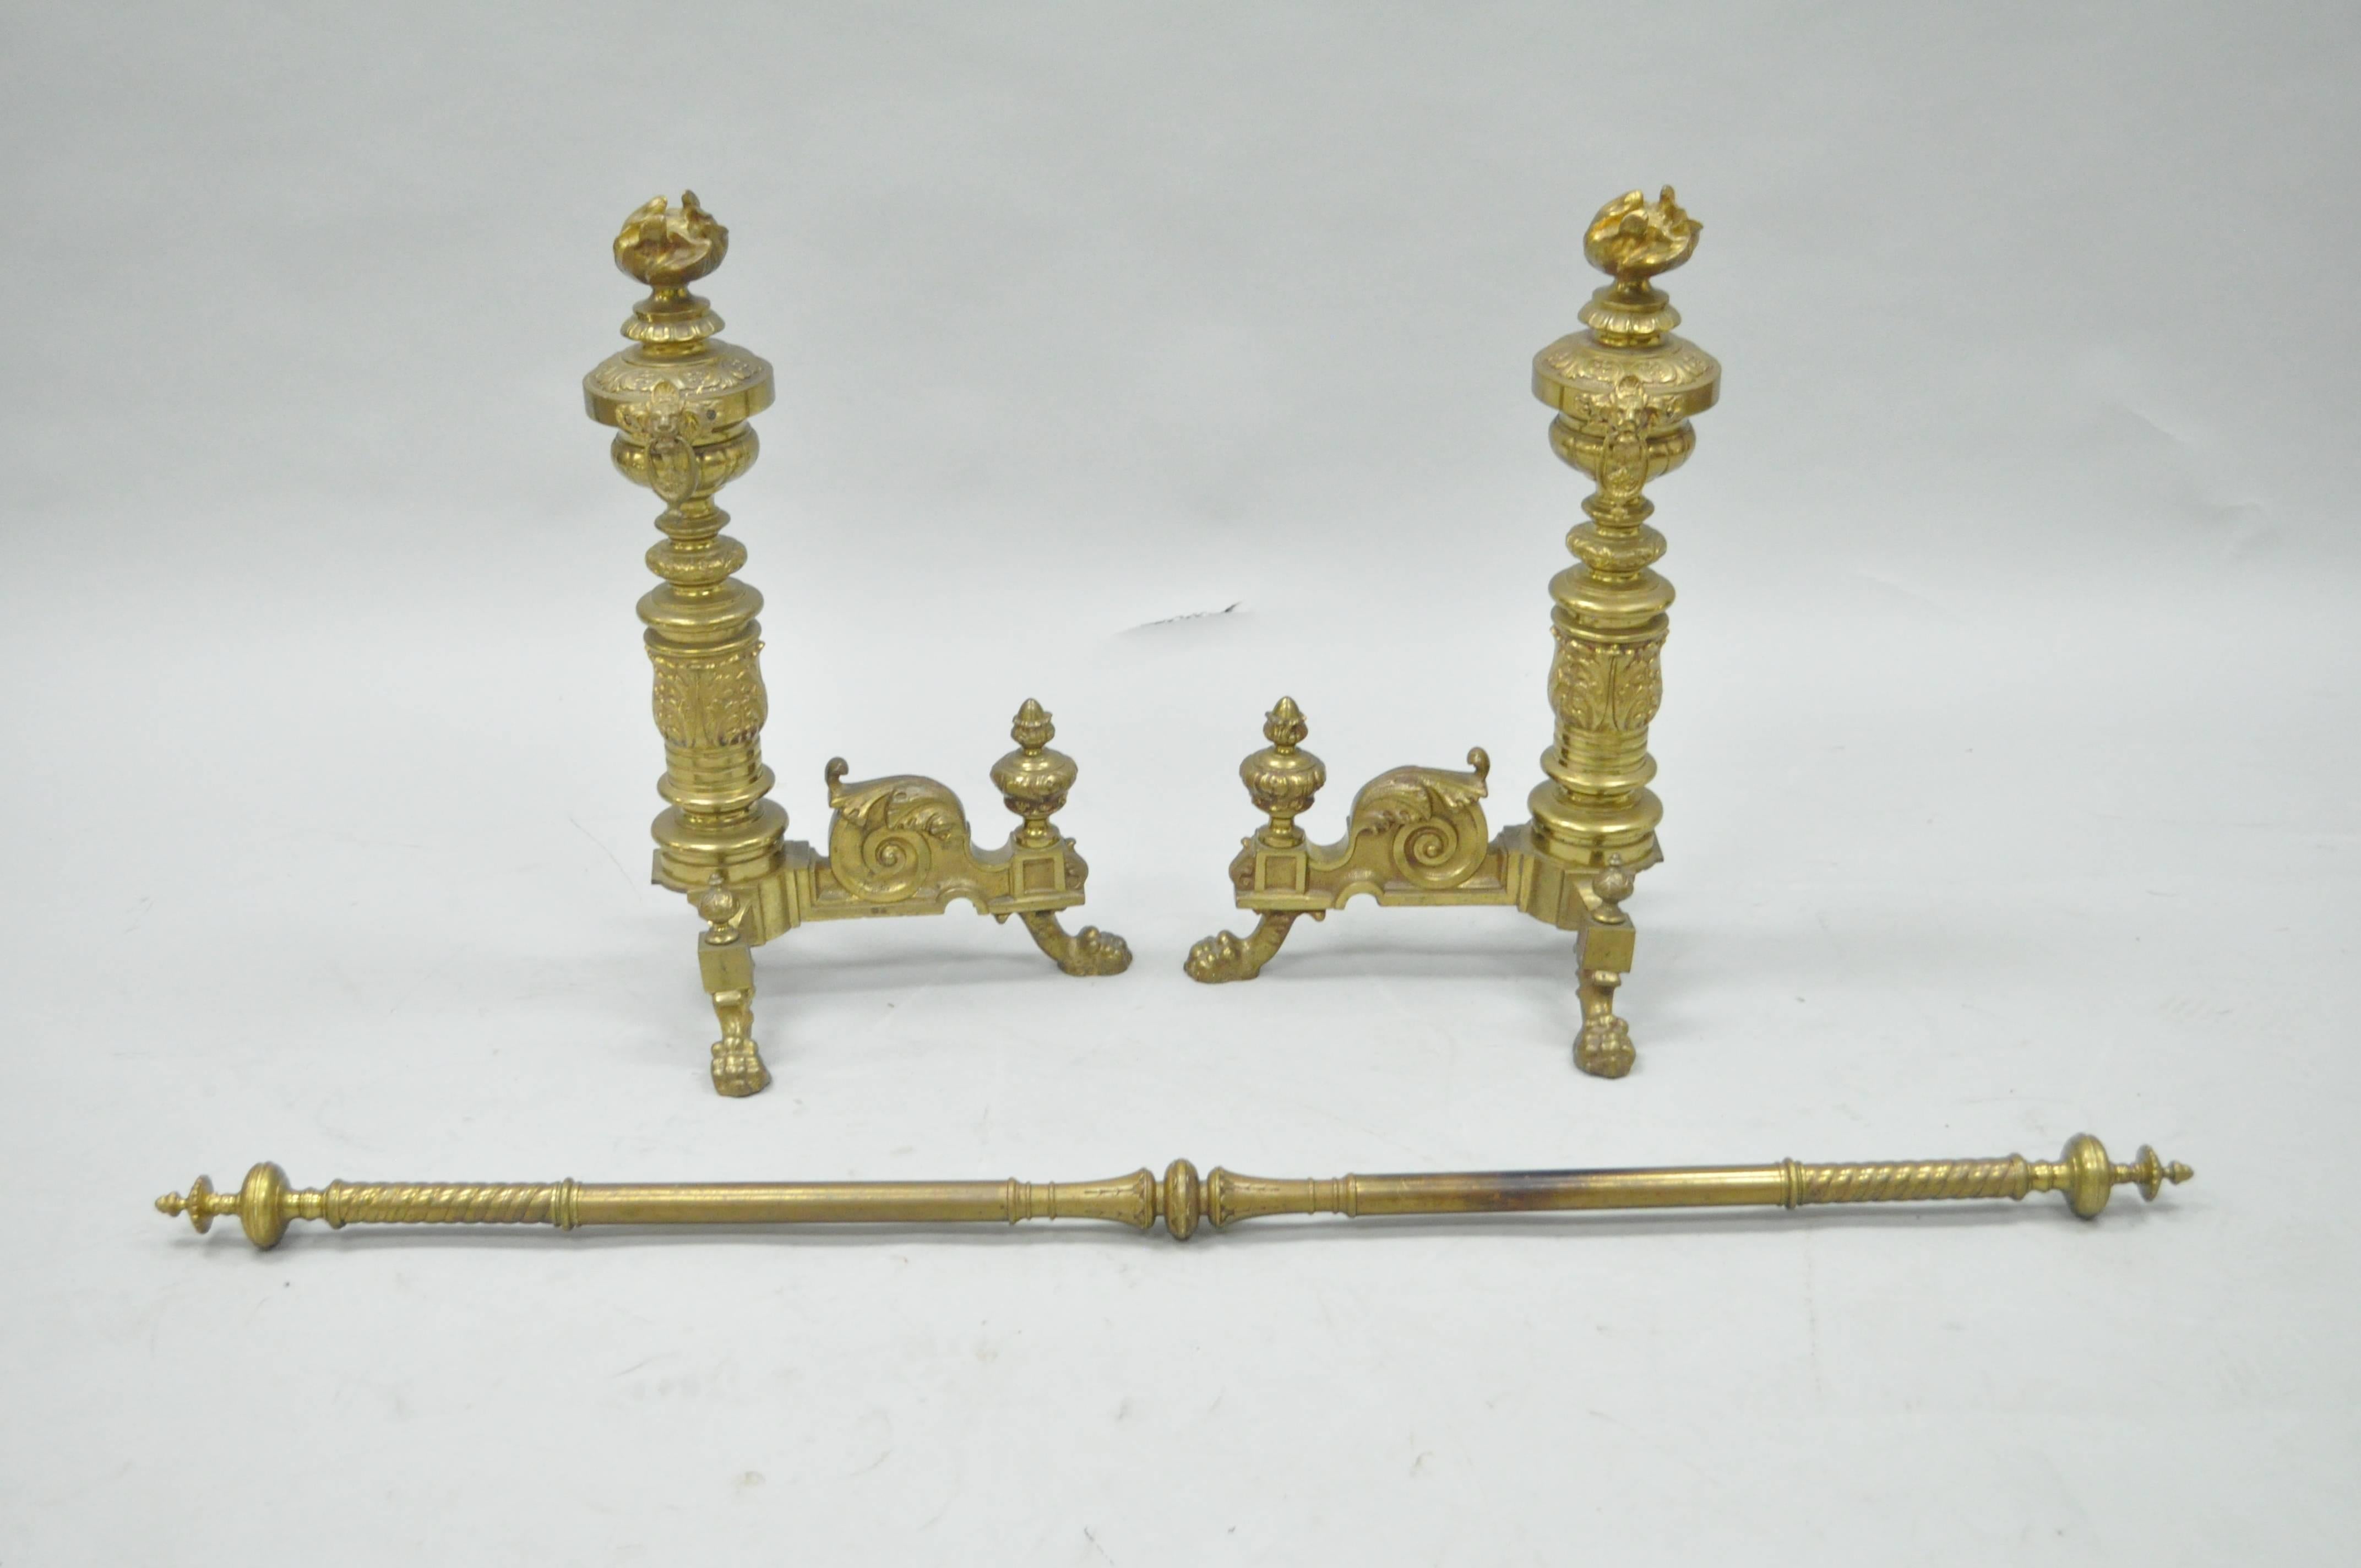 Remarkable Pair of 19th Century French Neoclassical Flame & Lion Brass Paw Foot Andirons with Bar. Set features an ornate pair of cast brass andirons with flame finials, mounted with lion heads and drop rings, acanthus details, paw feet, and ornate